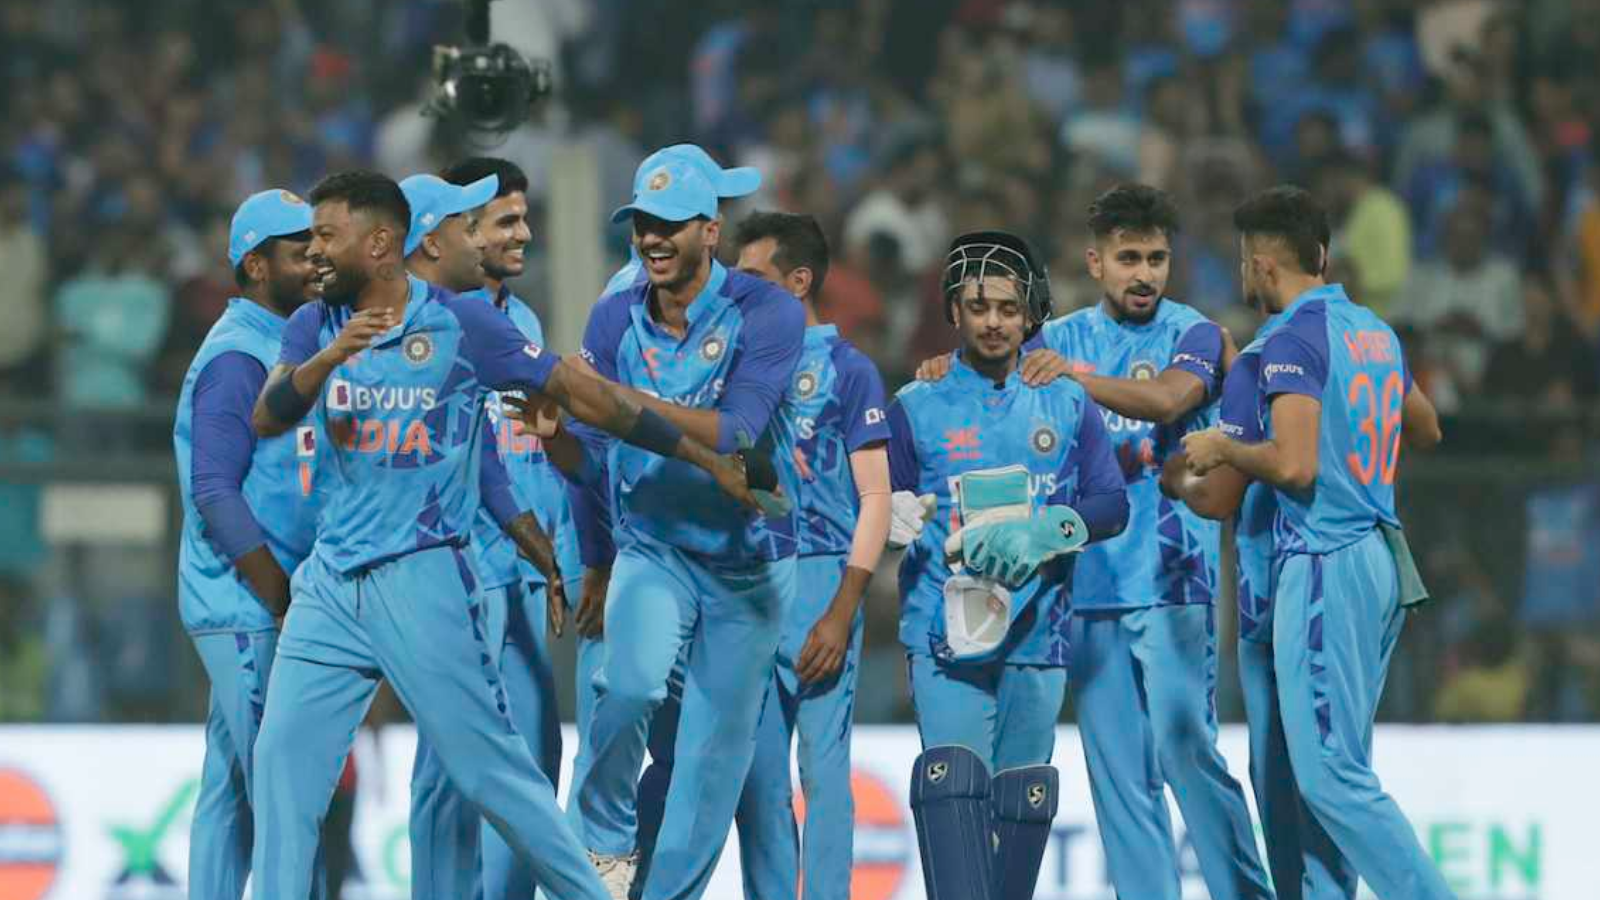 Indian Cricket Team | IND vs WI | Image : Getty Images